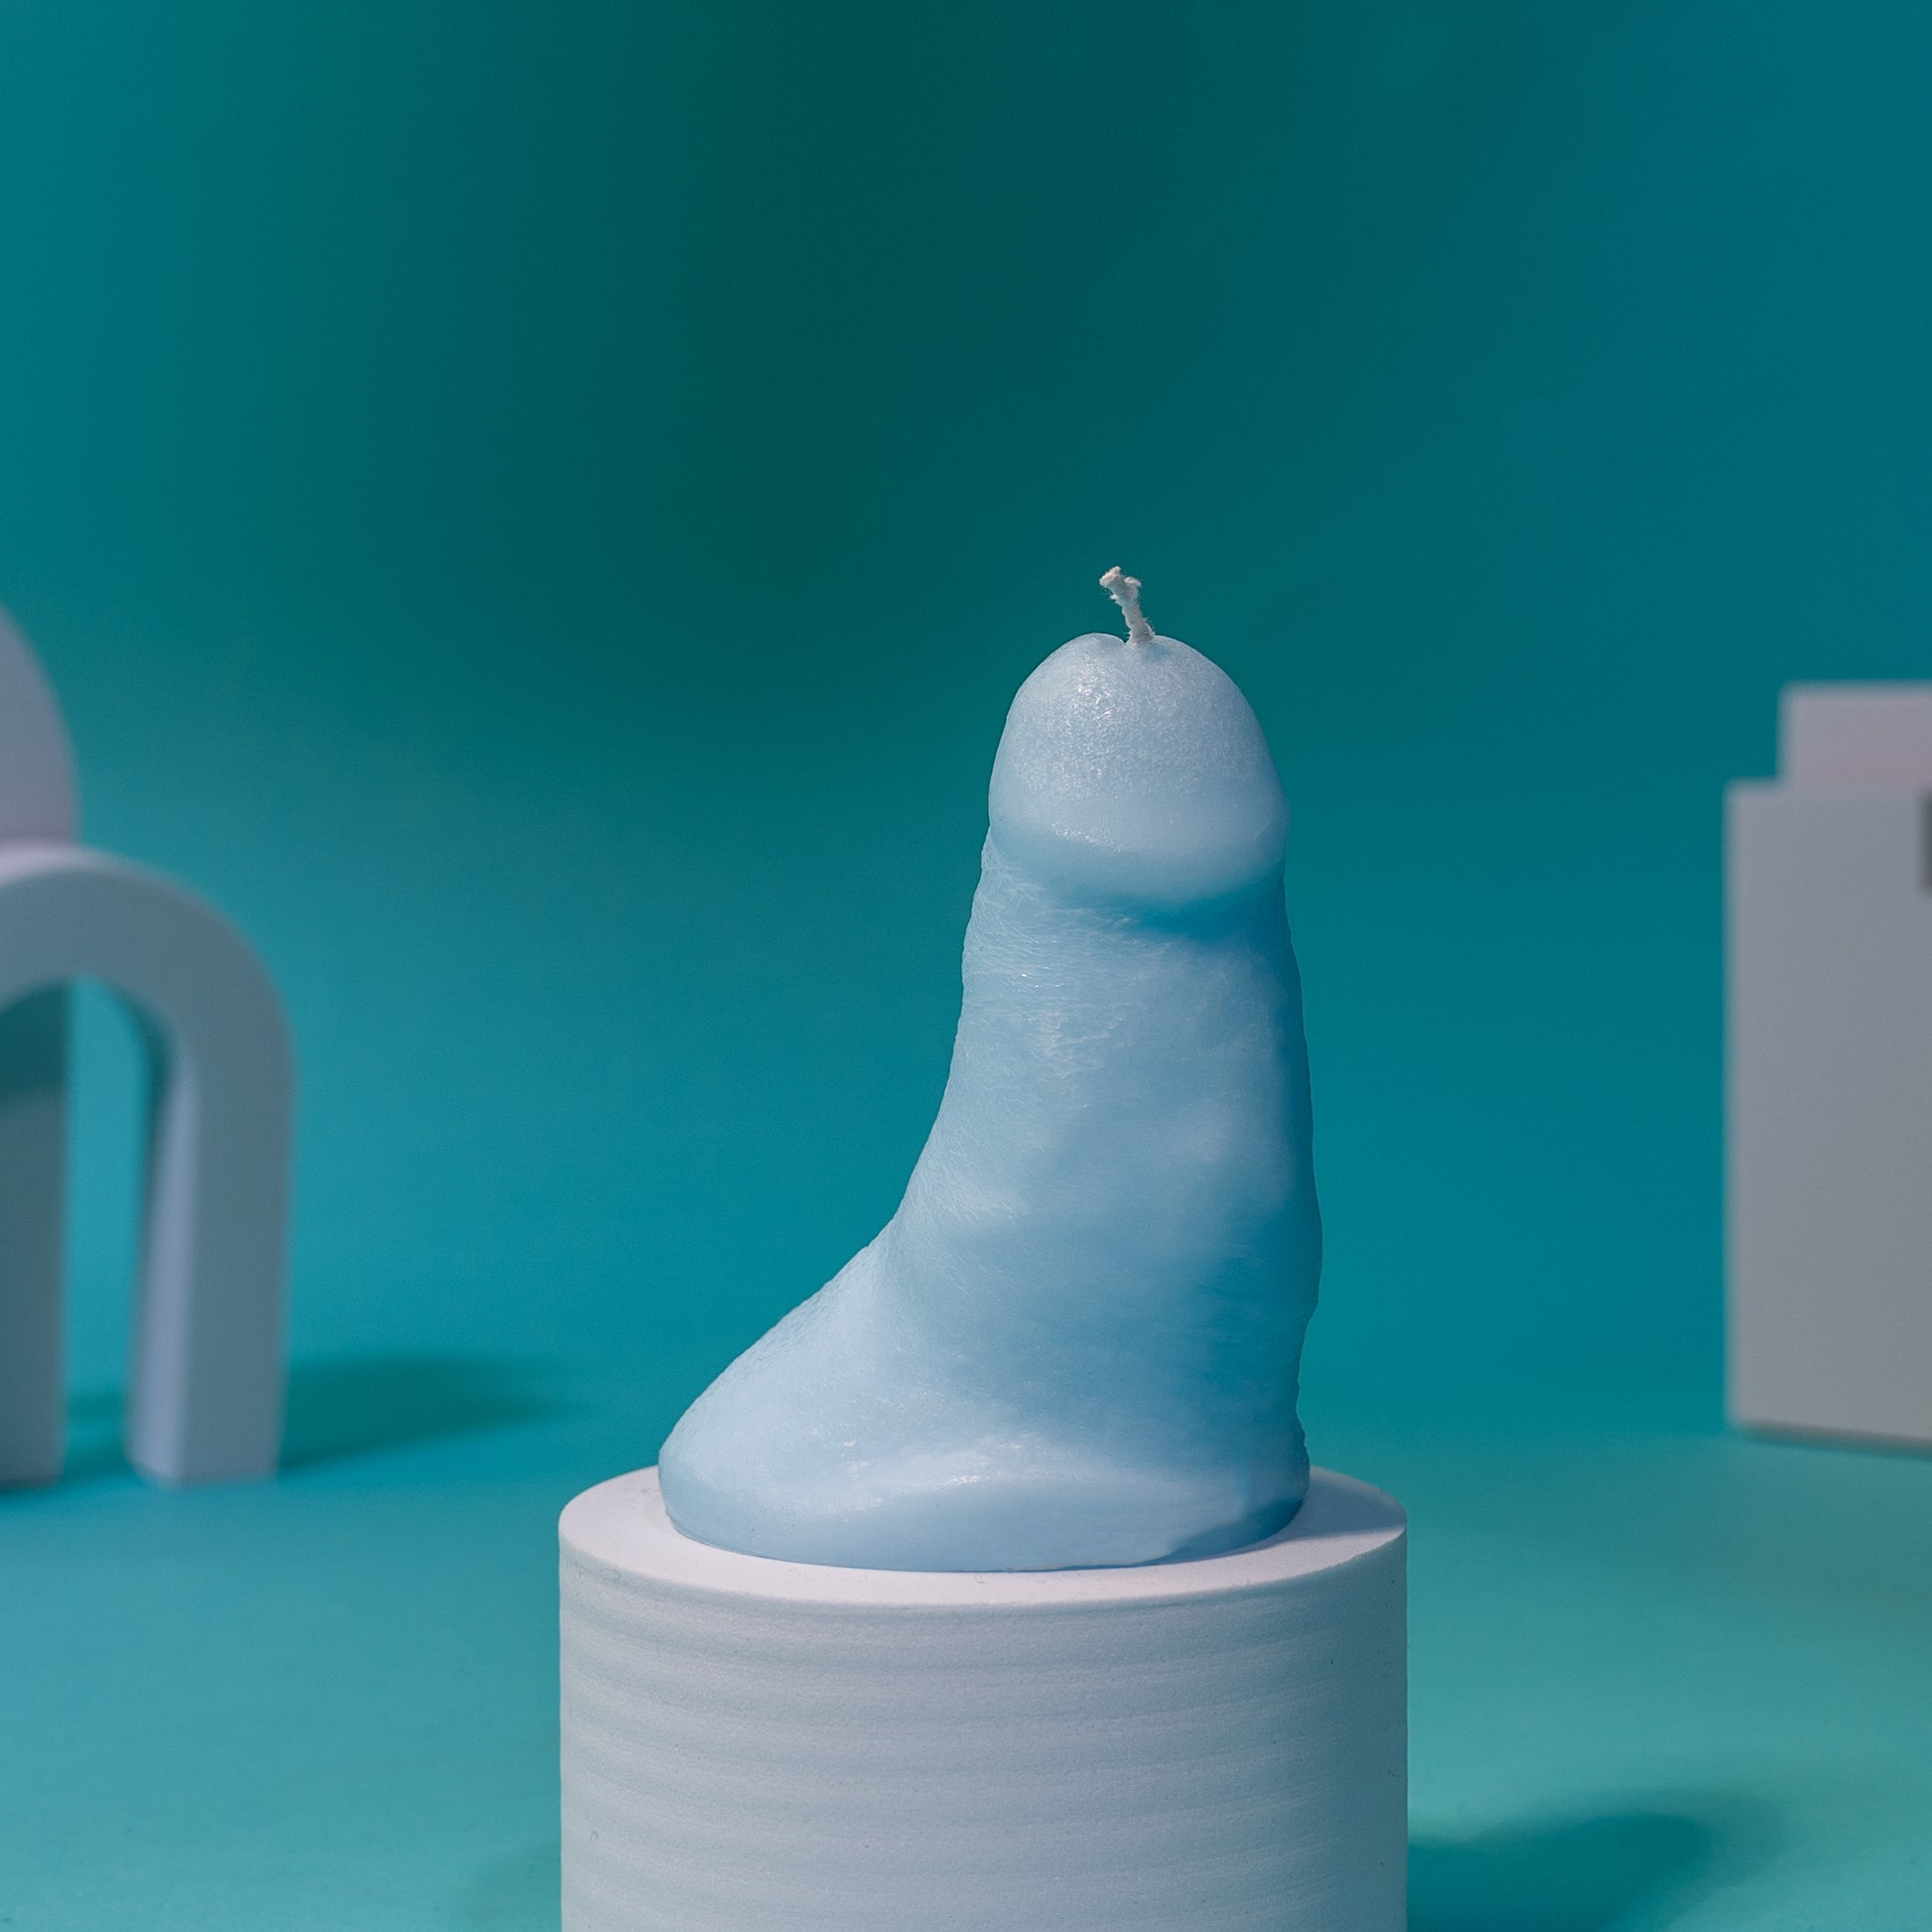 Giggeli penis candle, embodying body positivity and encouraging open dialogue about our intimate areas